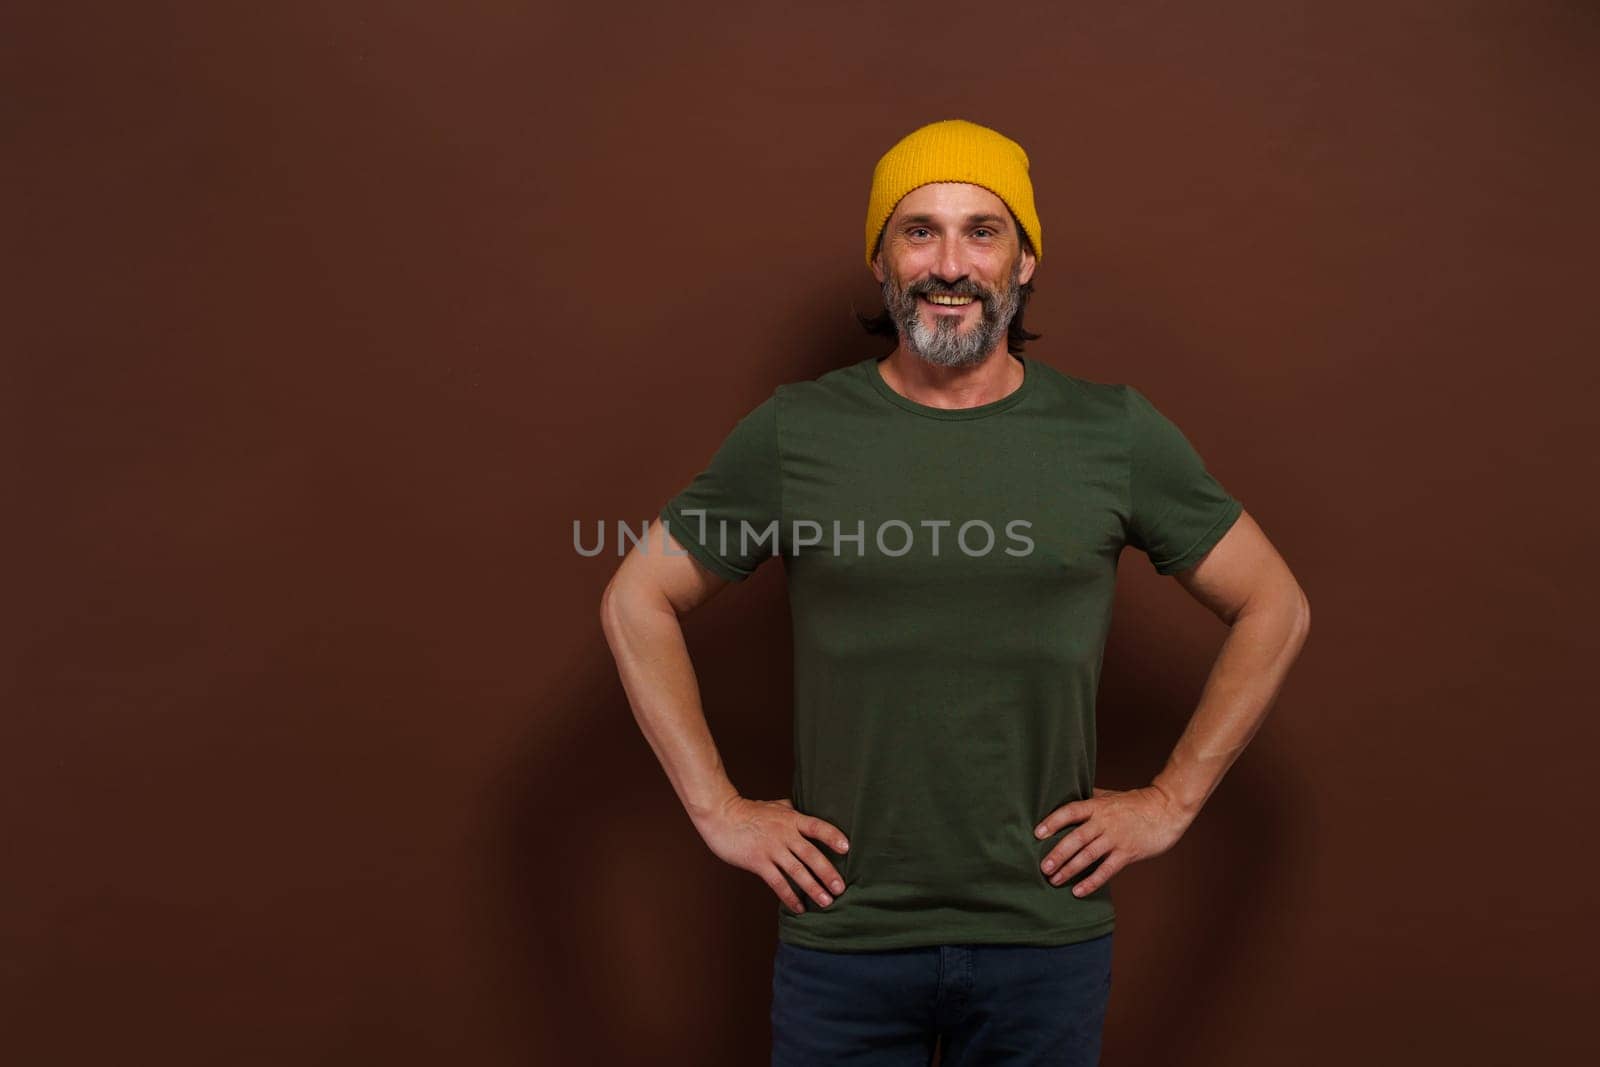 Happy confident middle-aged man standing with hands on sides on brown background. Posture and joyful smile convey sense of confidence, contentment, and success. mature individual in assertive stance. High quality photo